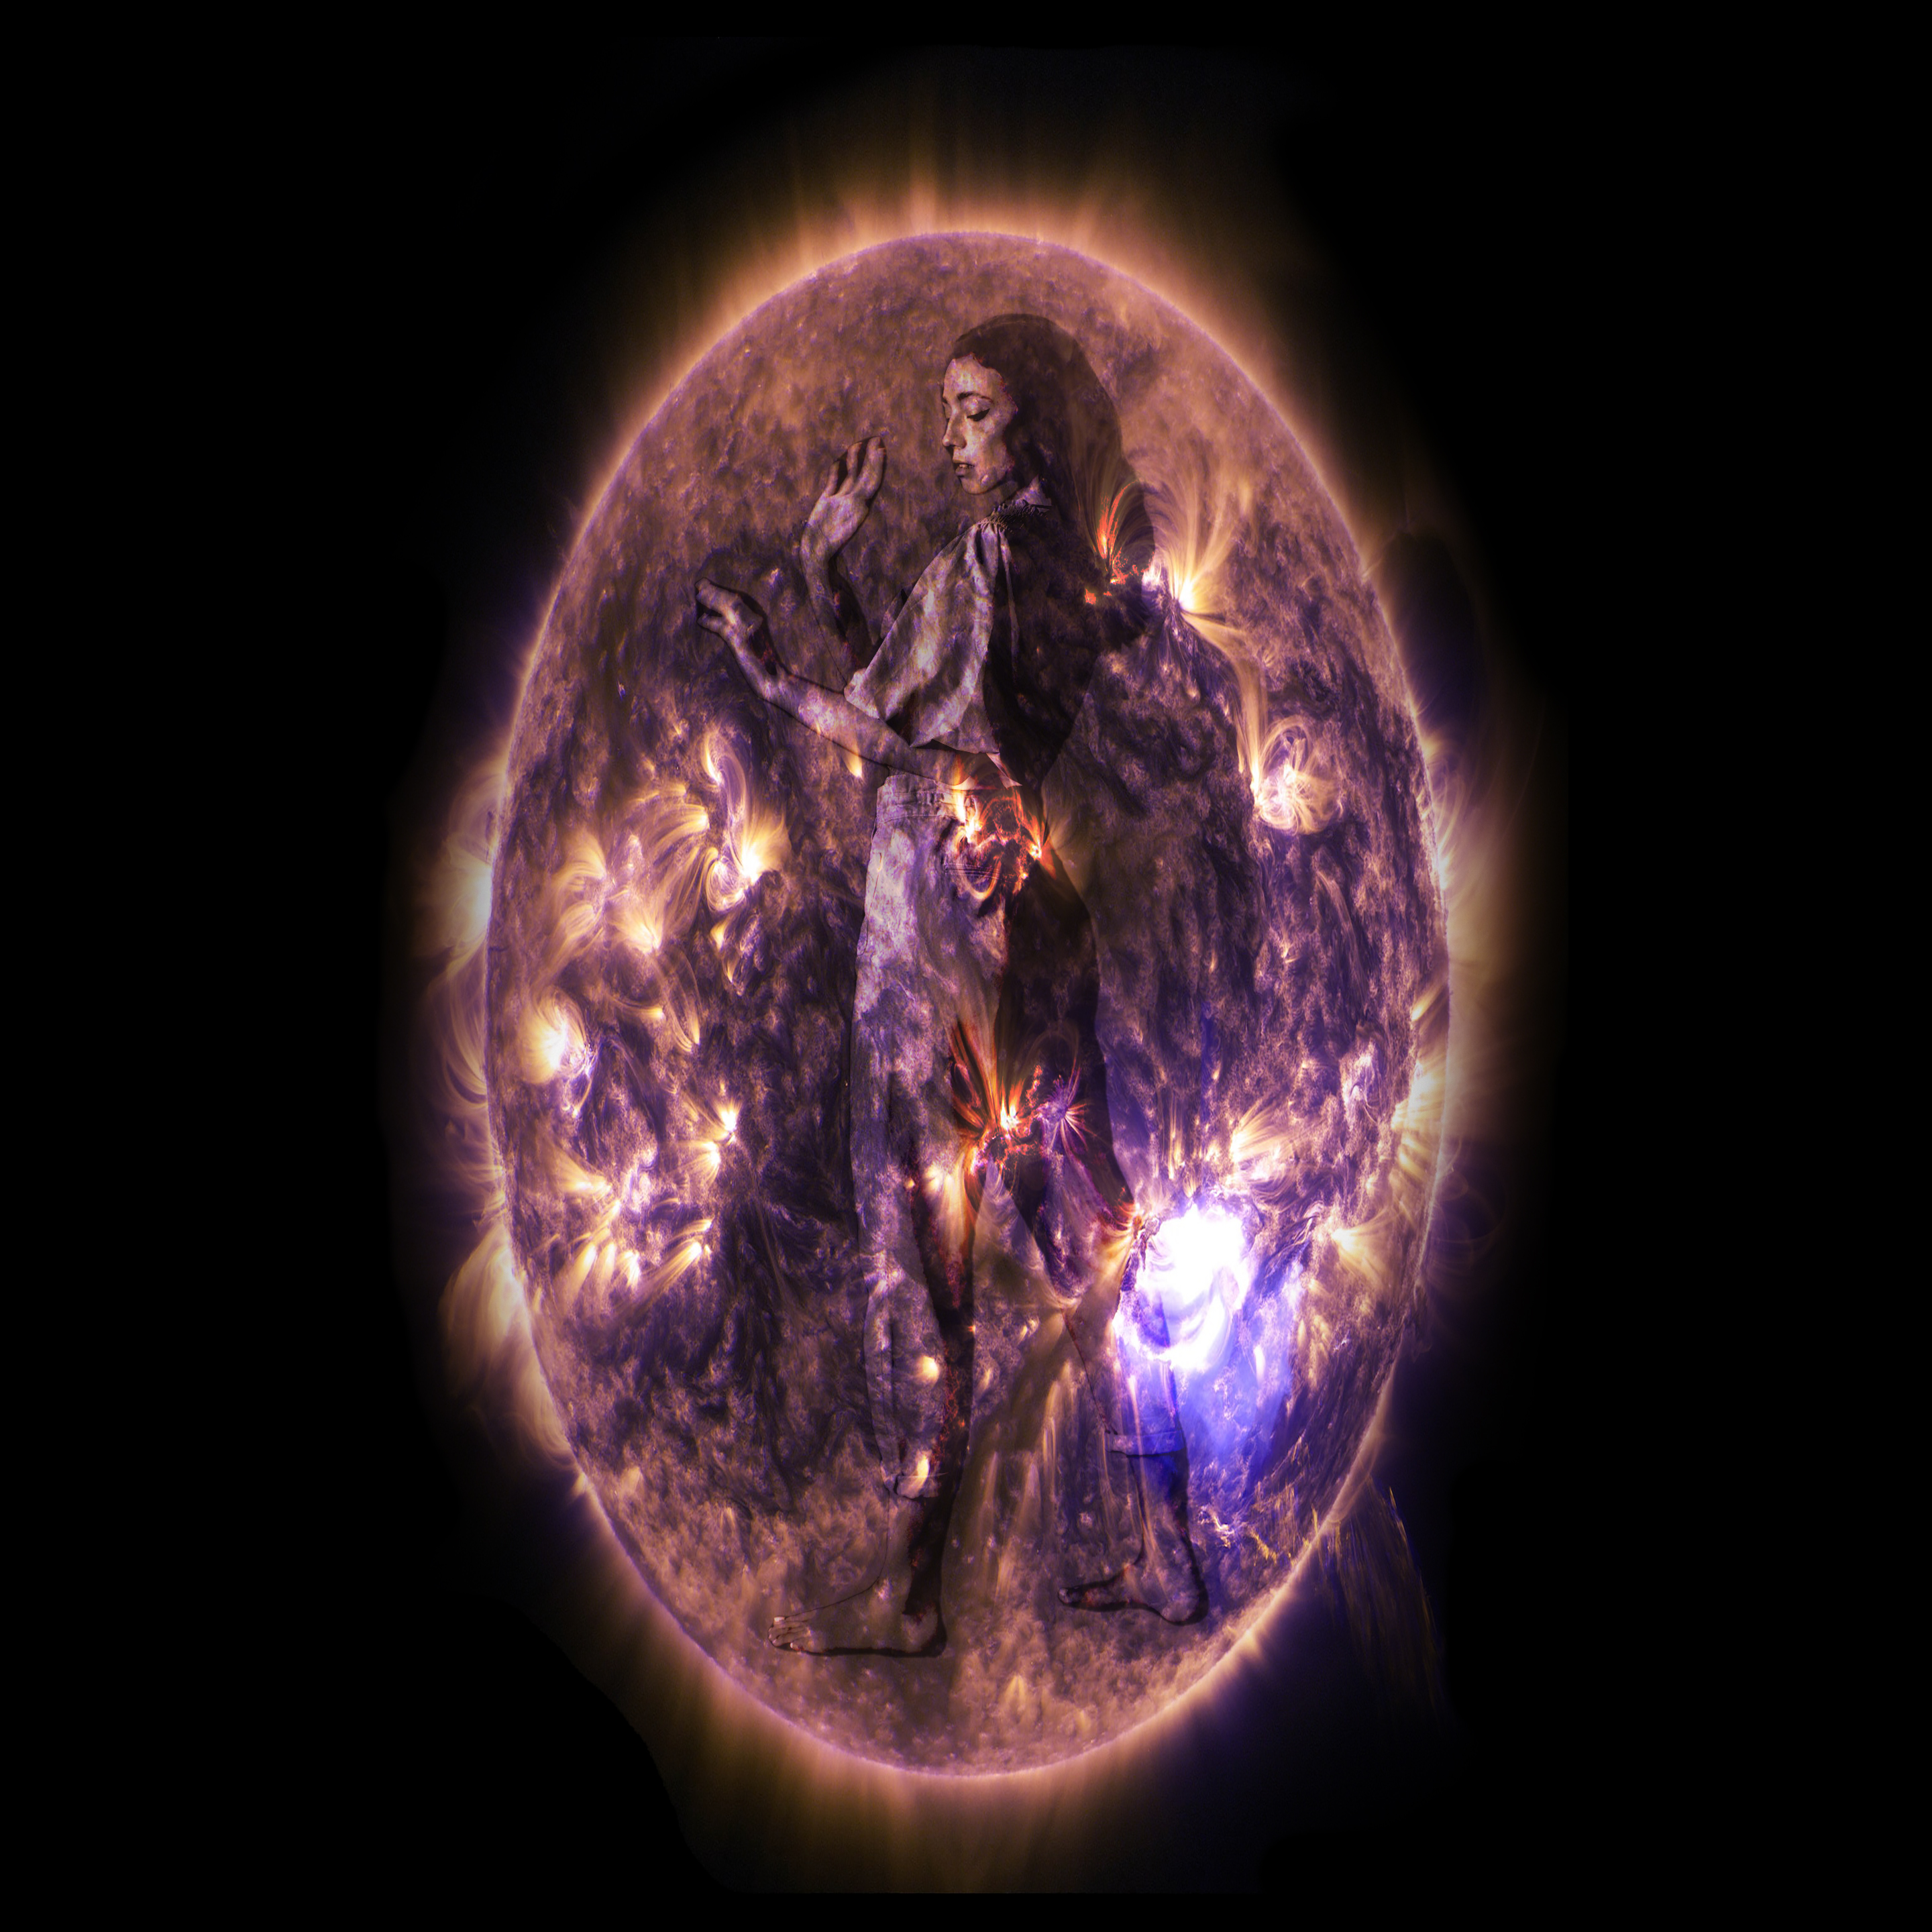 Artist's impression of a woman's luminous cocoon.